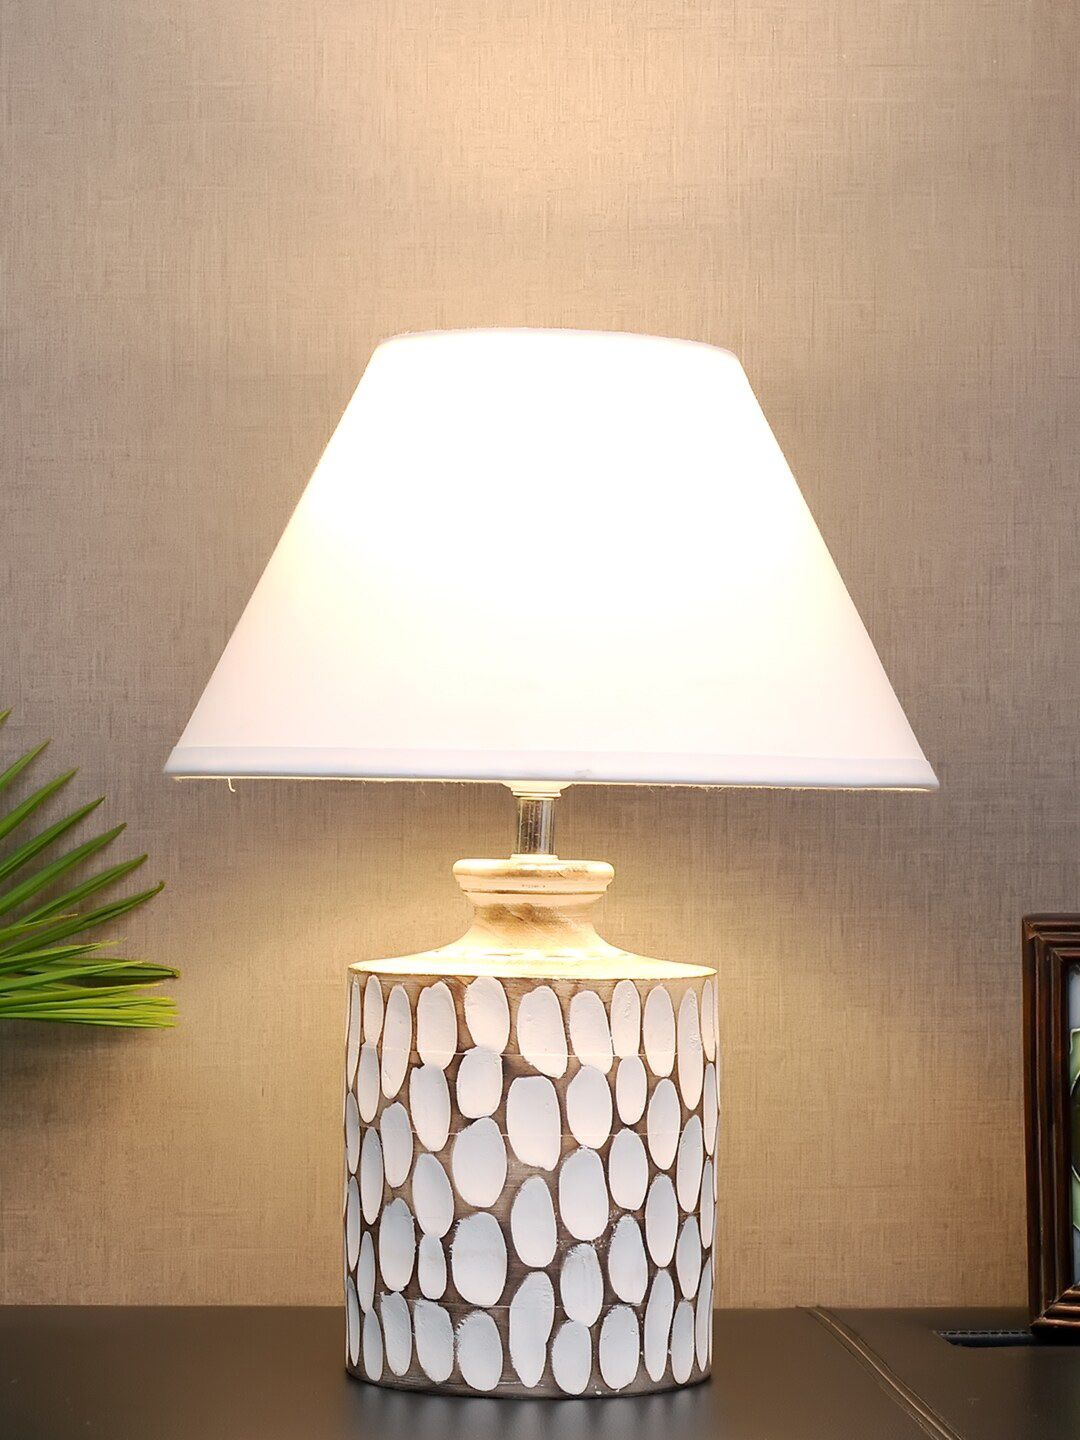 THE LIGHT STORE White Self-Design Bedside Standard Lamp With Shade Price in India